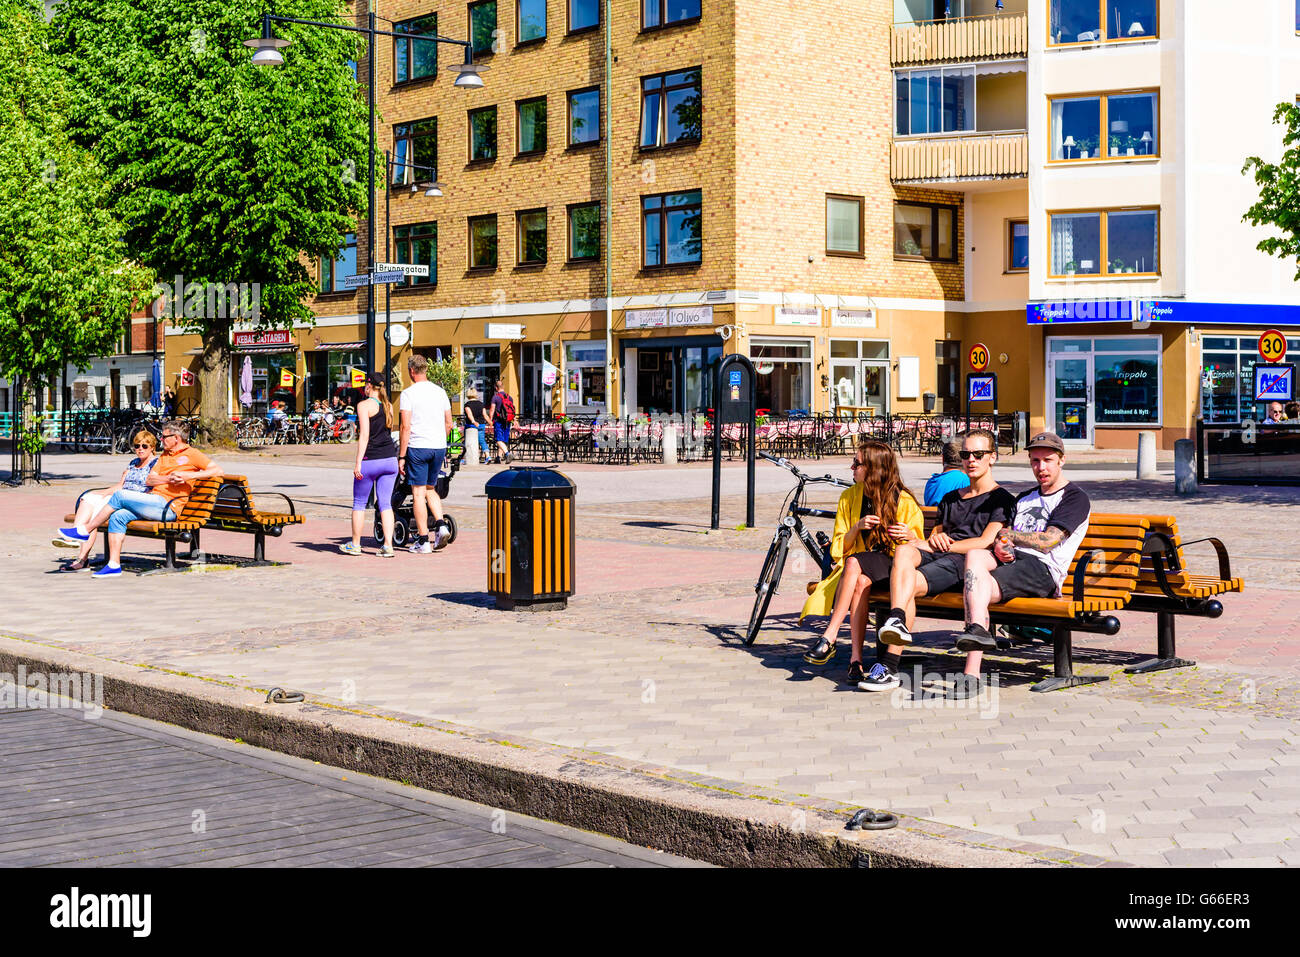 Vastervik, Sweden - June 19, 2016: People walking and resting along the seaside promenade. Real people in everyday life. Stock Photo